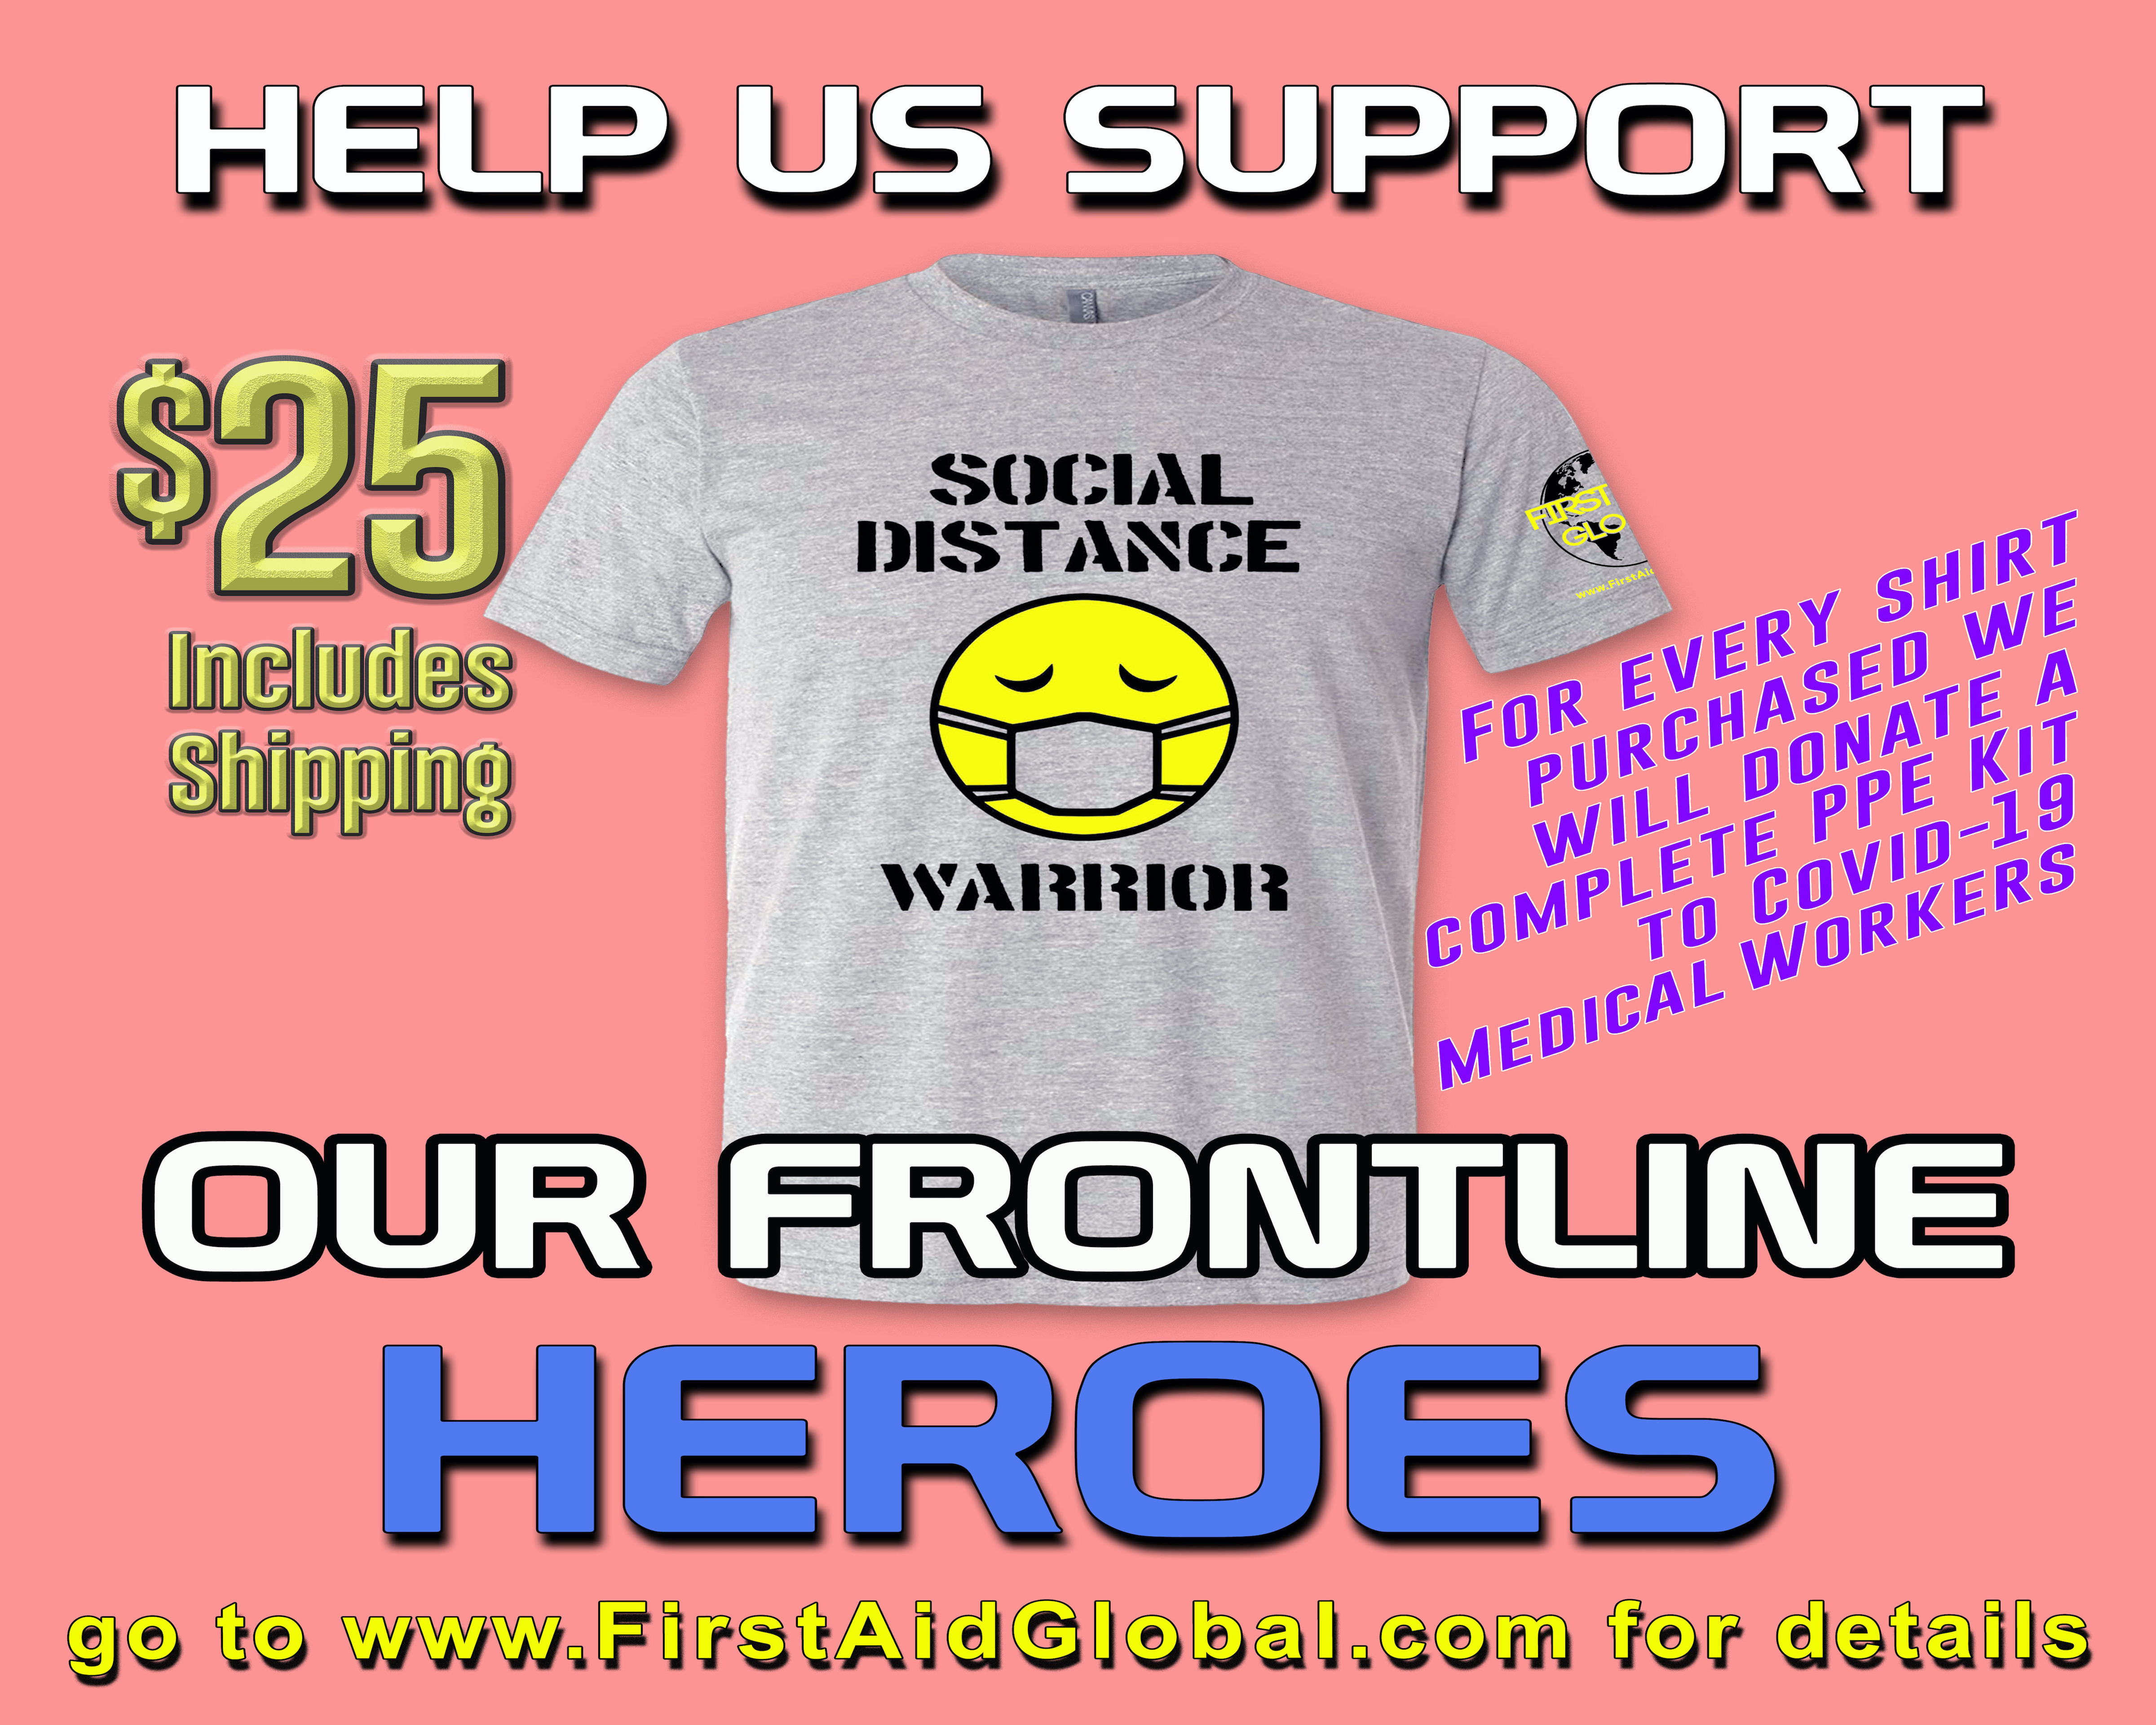 Purchase a T-shirt, donate a PPE